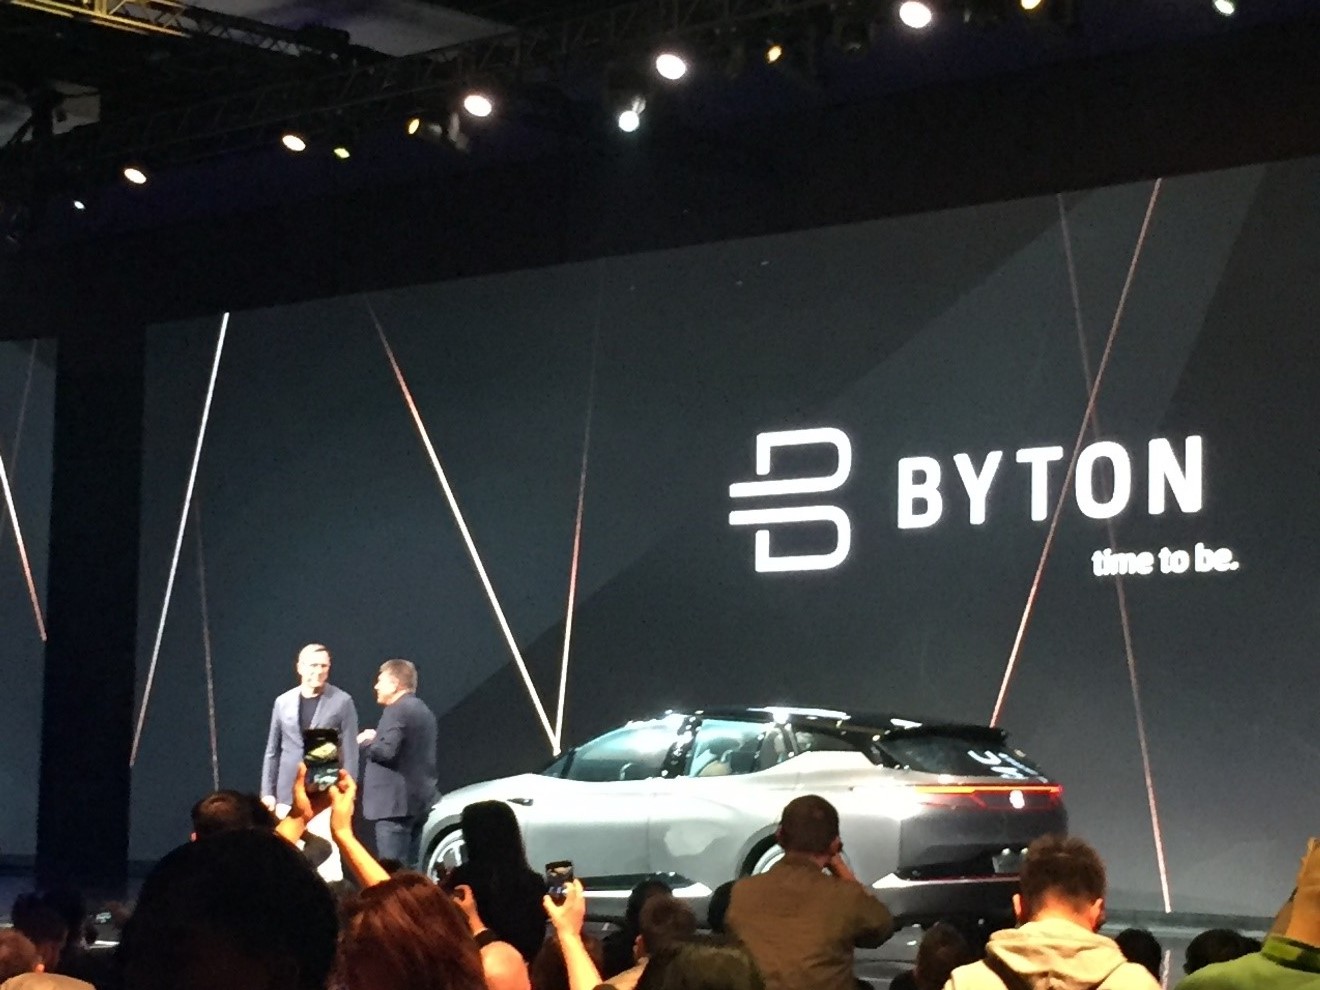 Carsten Breitfeld and Daniel Kirchert, Byton’s co-founders present their concept SUV, which they believe will be the first ever truly smart car.